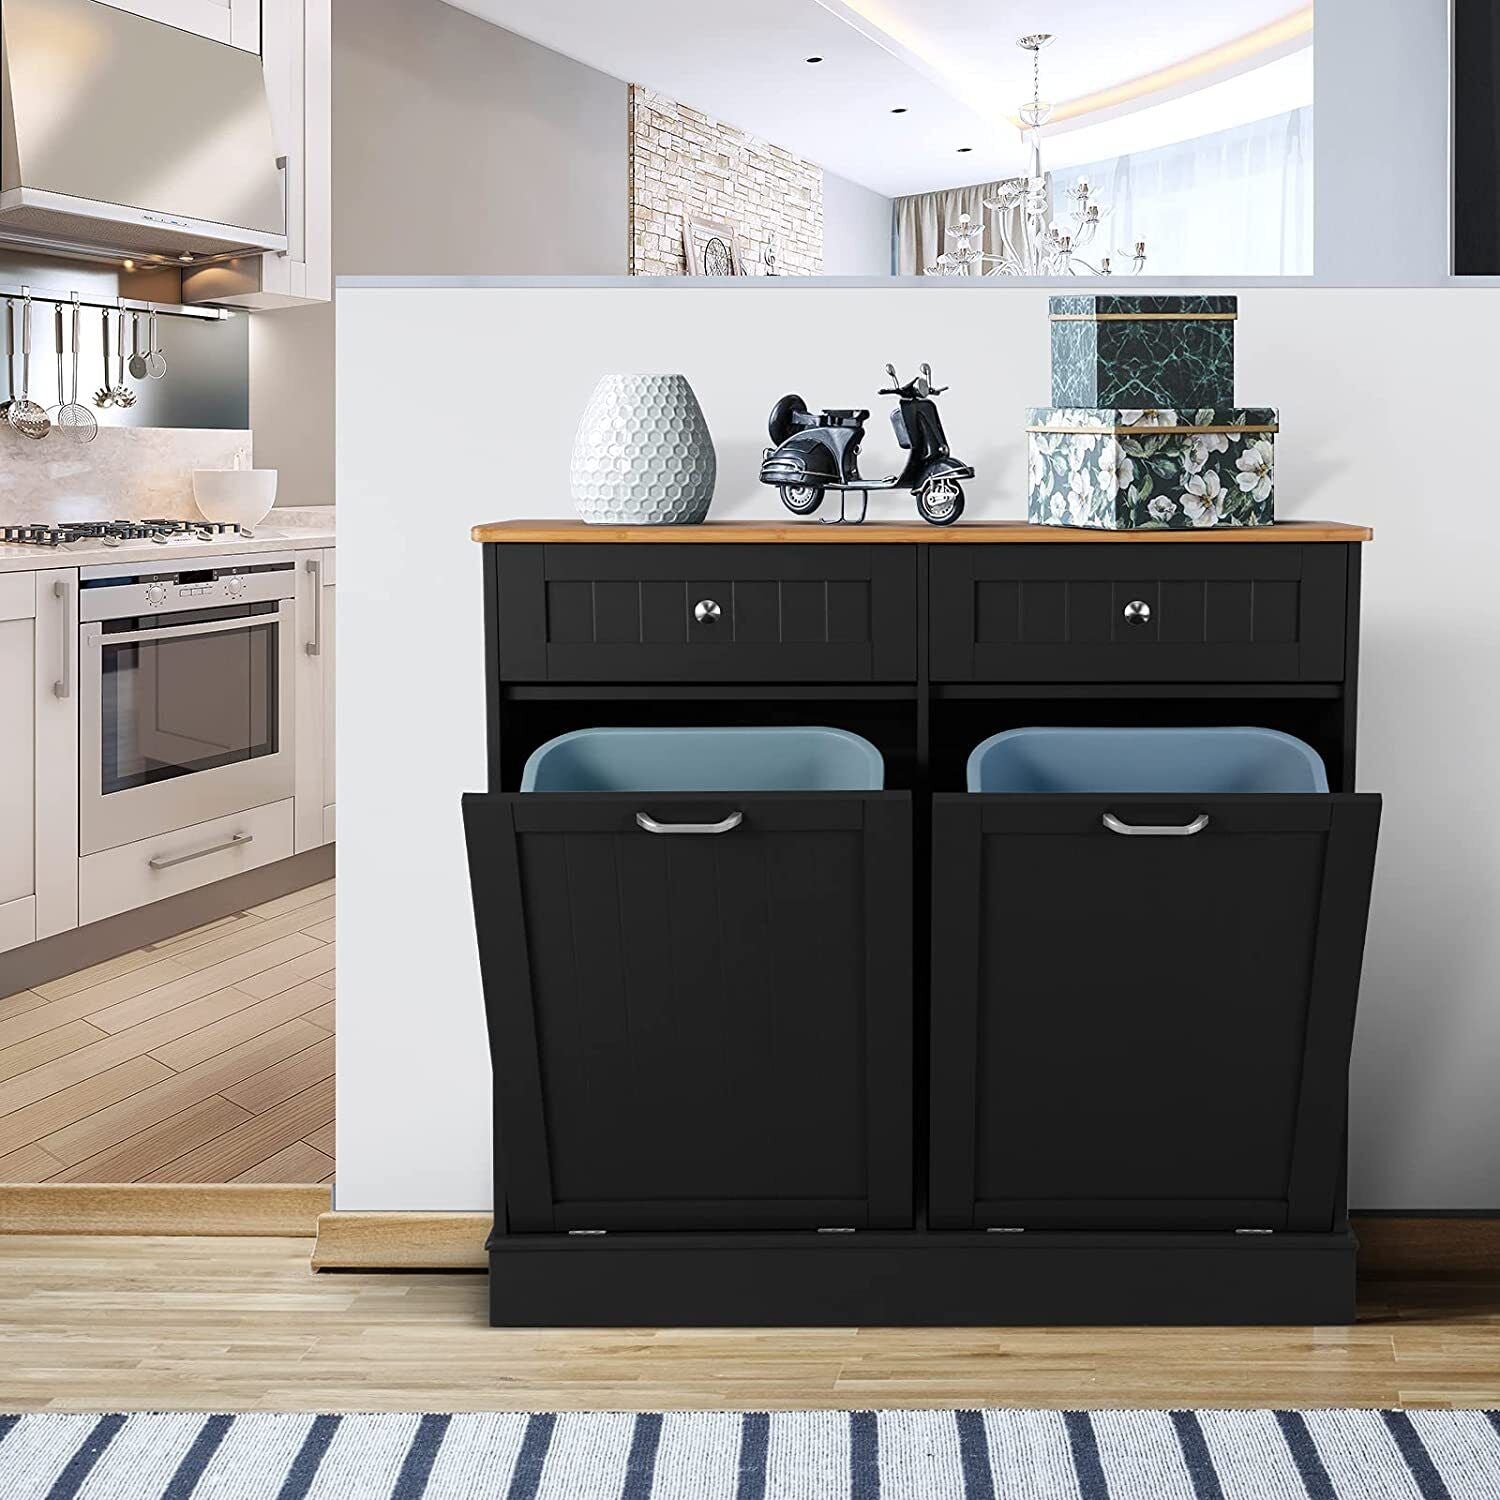 Large Double Kitchen Garbage Trash Can Cabinet — Rickle.